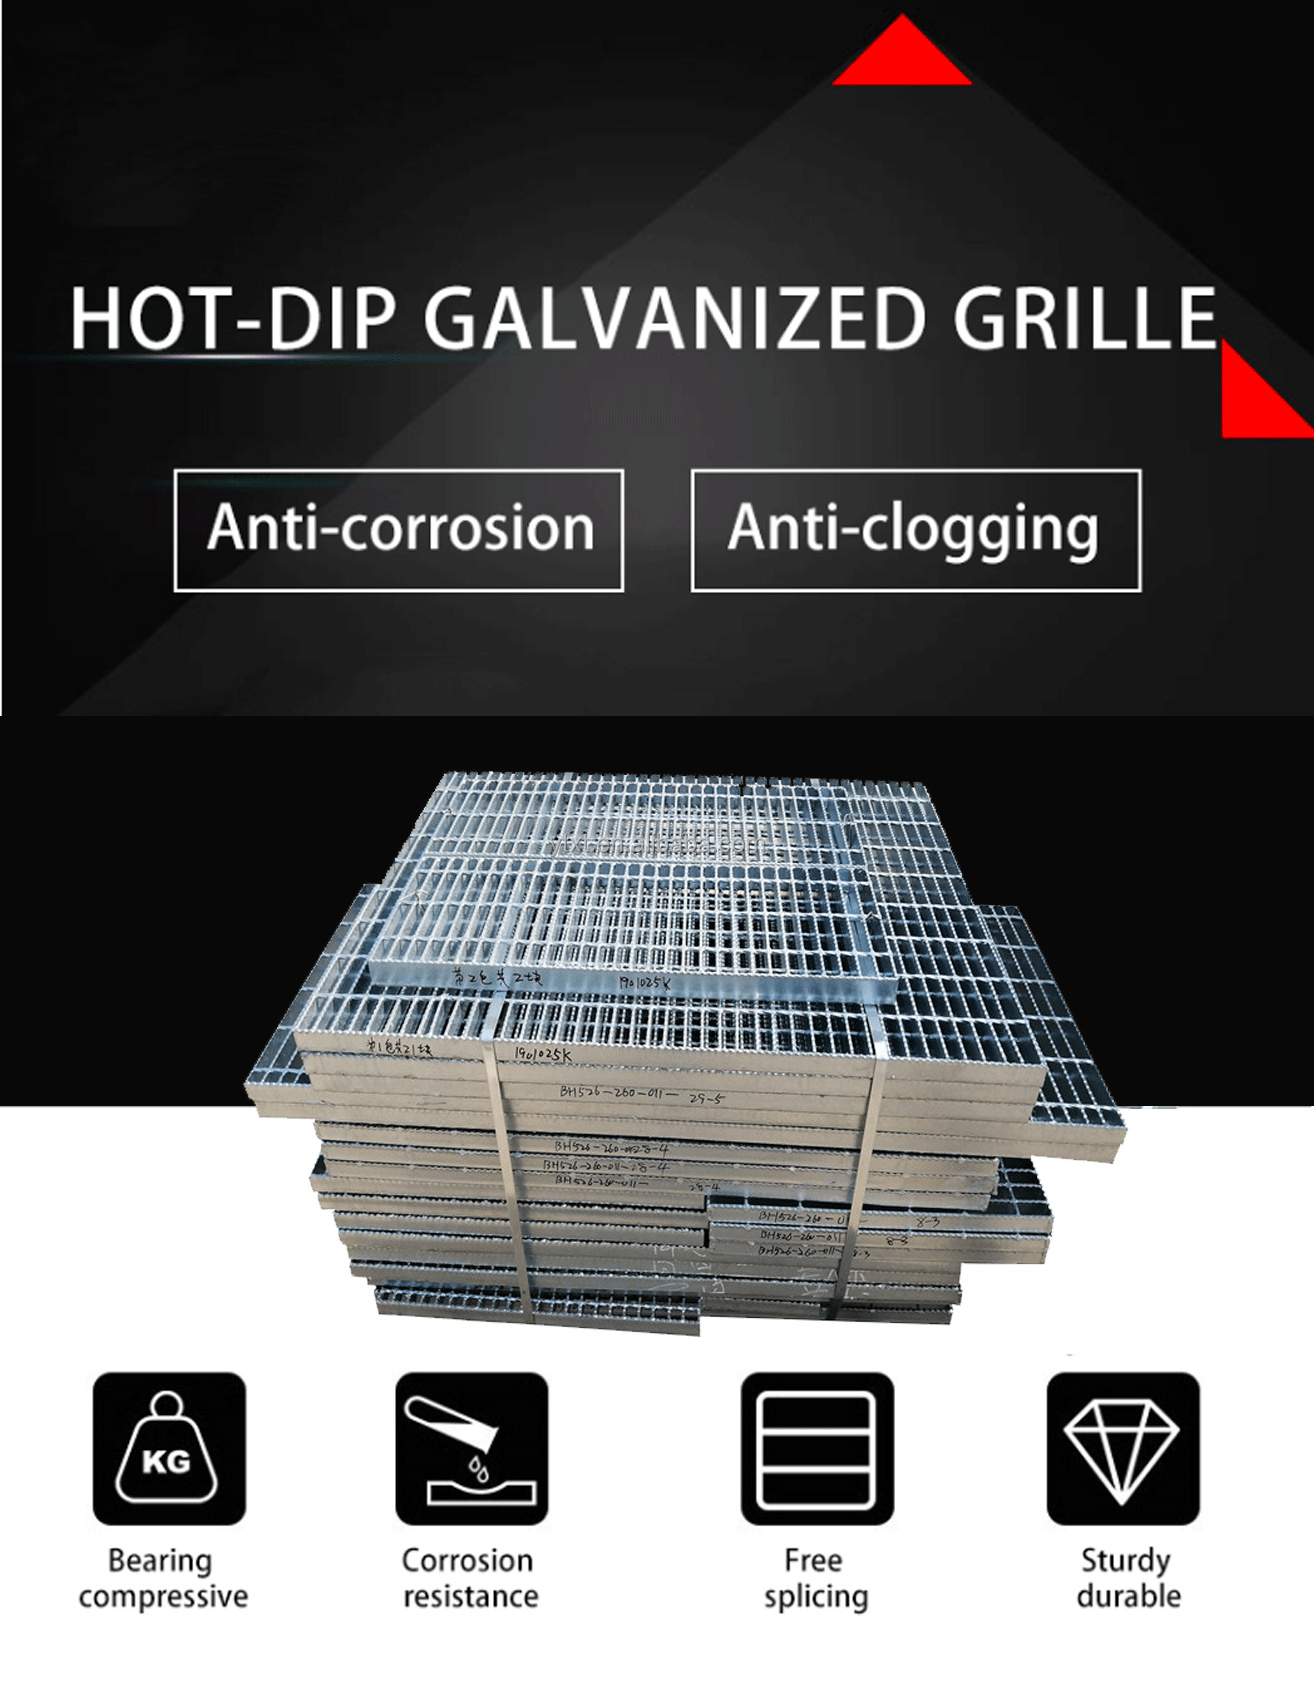 New product Galvanized Sheet steel grating serrated galvanized steel grating